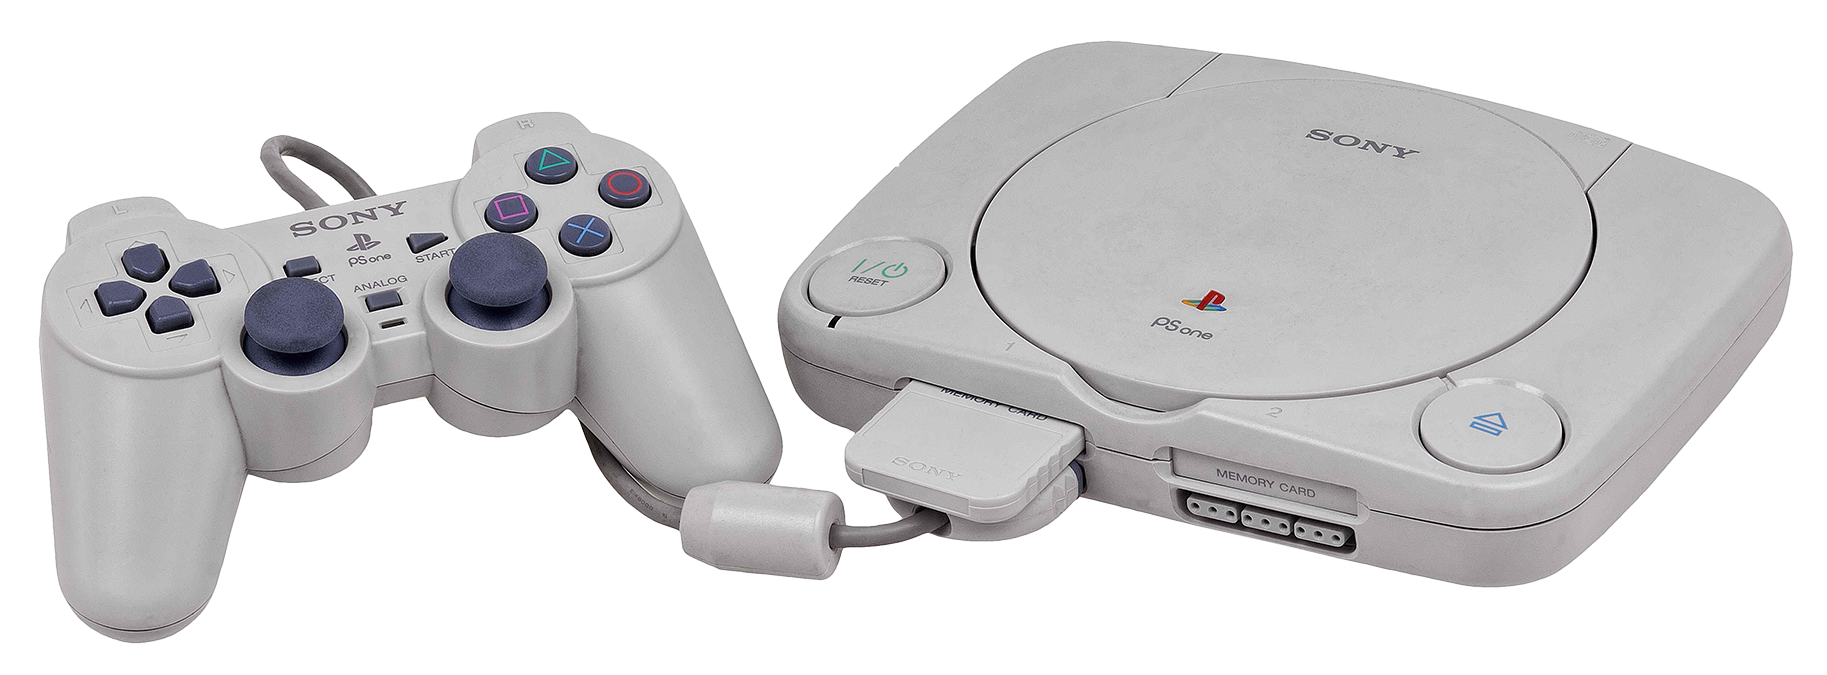 playstation ps one